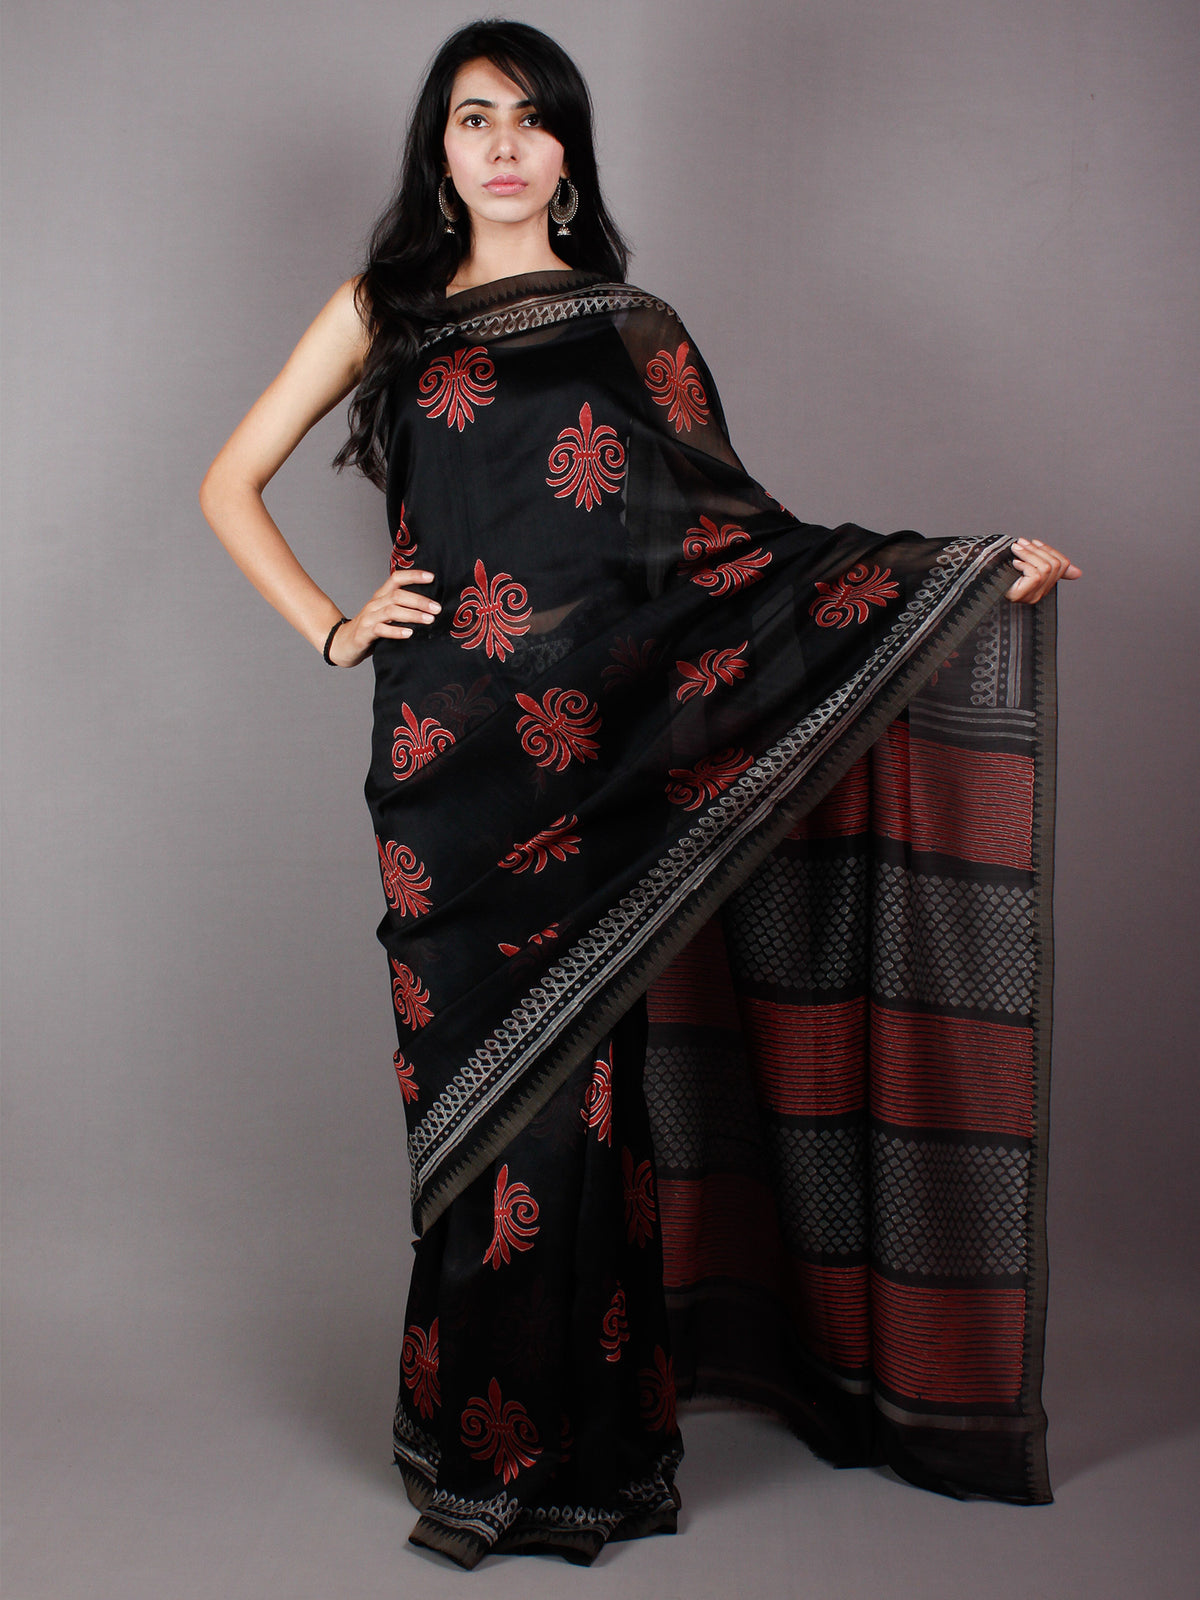 Black Red Grey Hand Block Printed in Natural Vegetable Colors Chanderi Saree With Geecha Border - S03170477